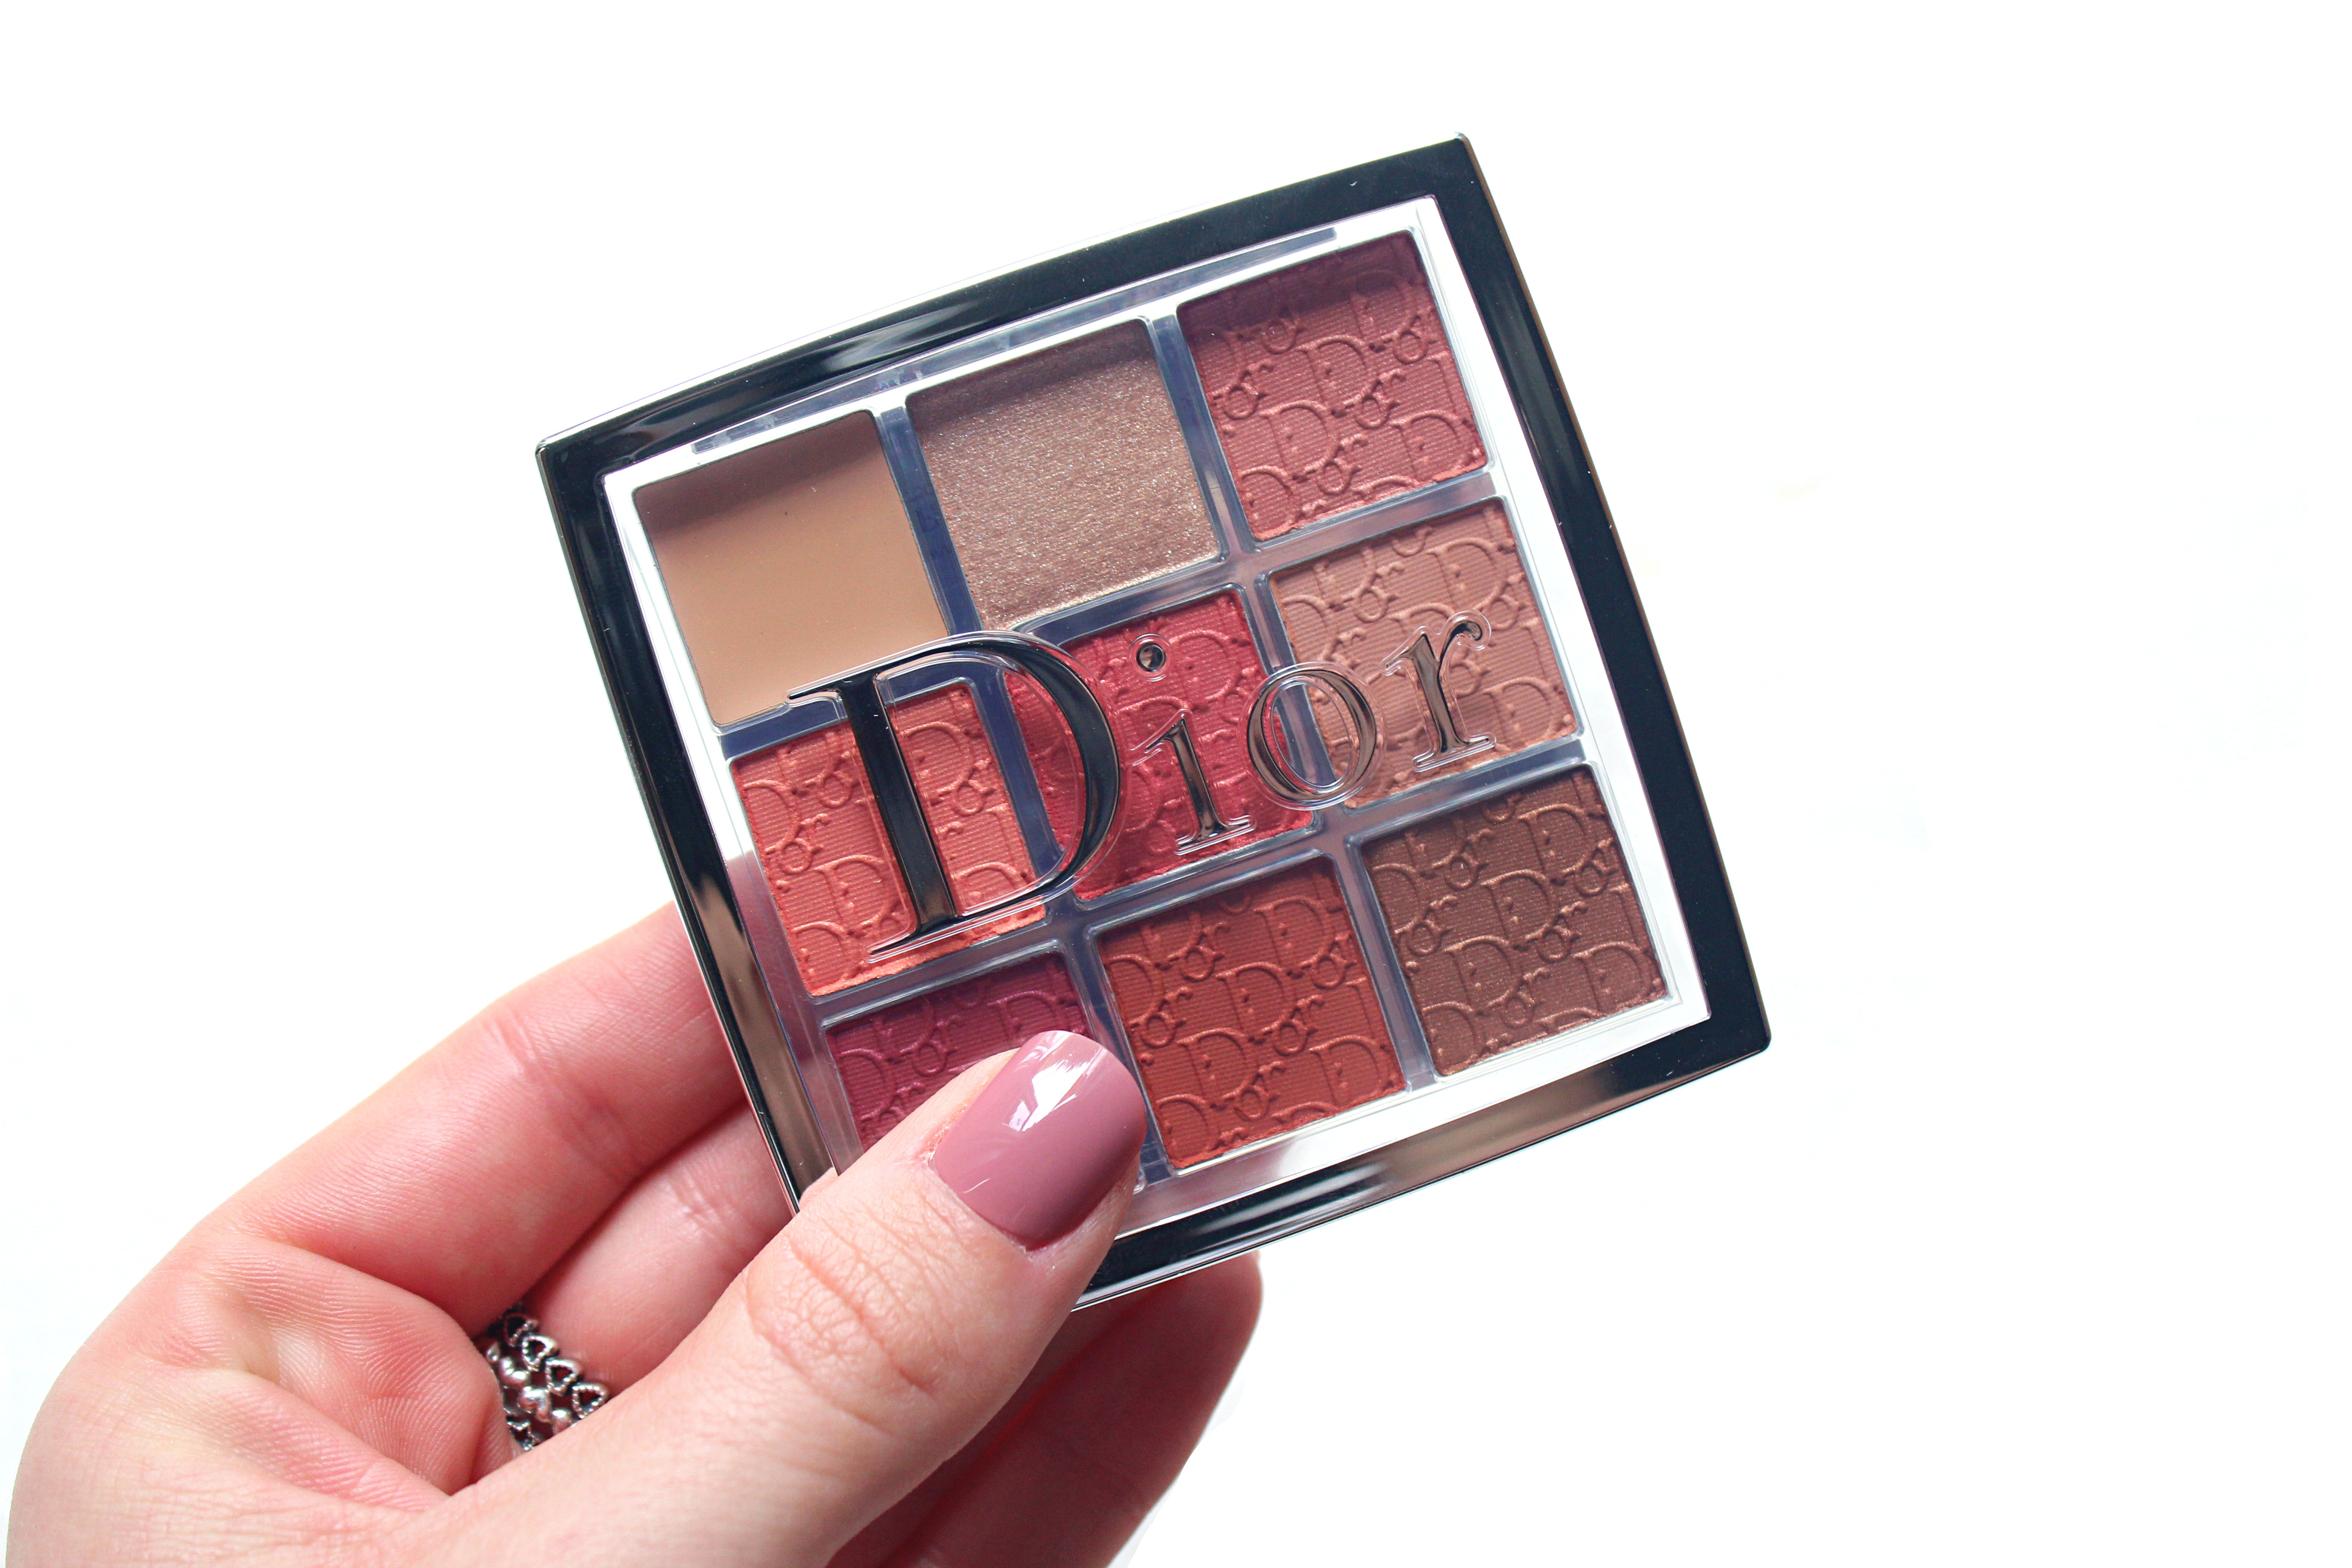 Dior Backstage Eyeshadow Palette in 007 Coral Neutrals Review (+ Swatches)